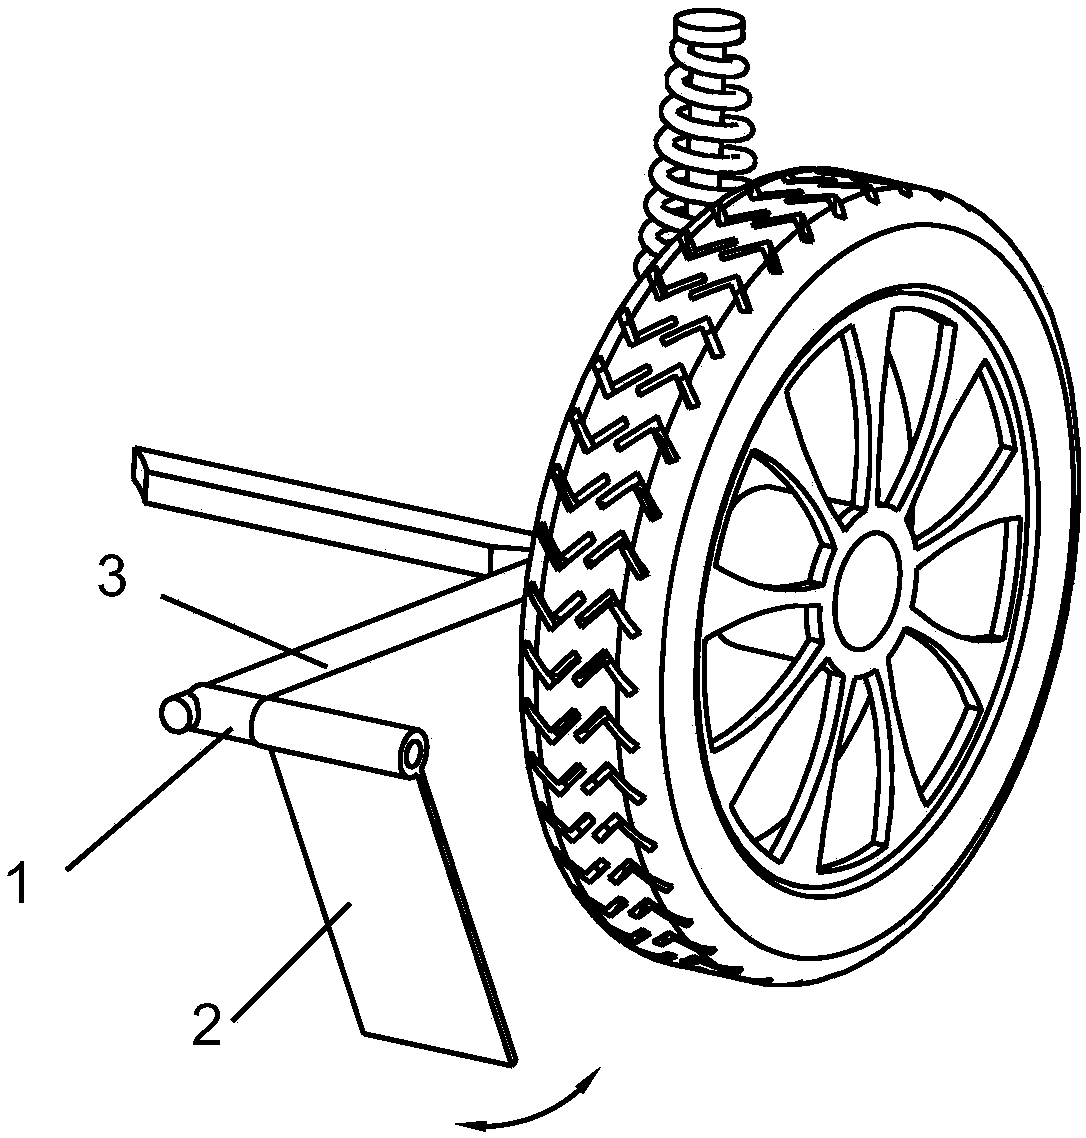 Rolling-free isolating device for wheel